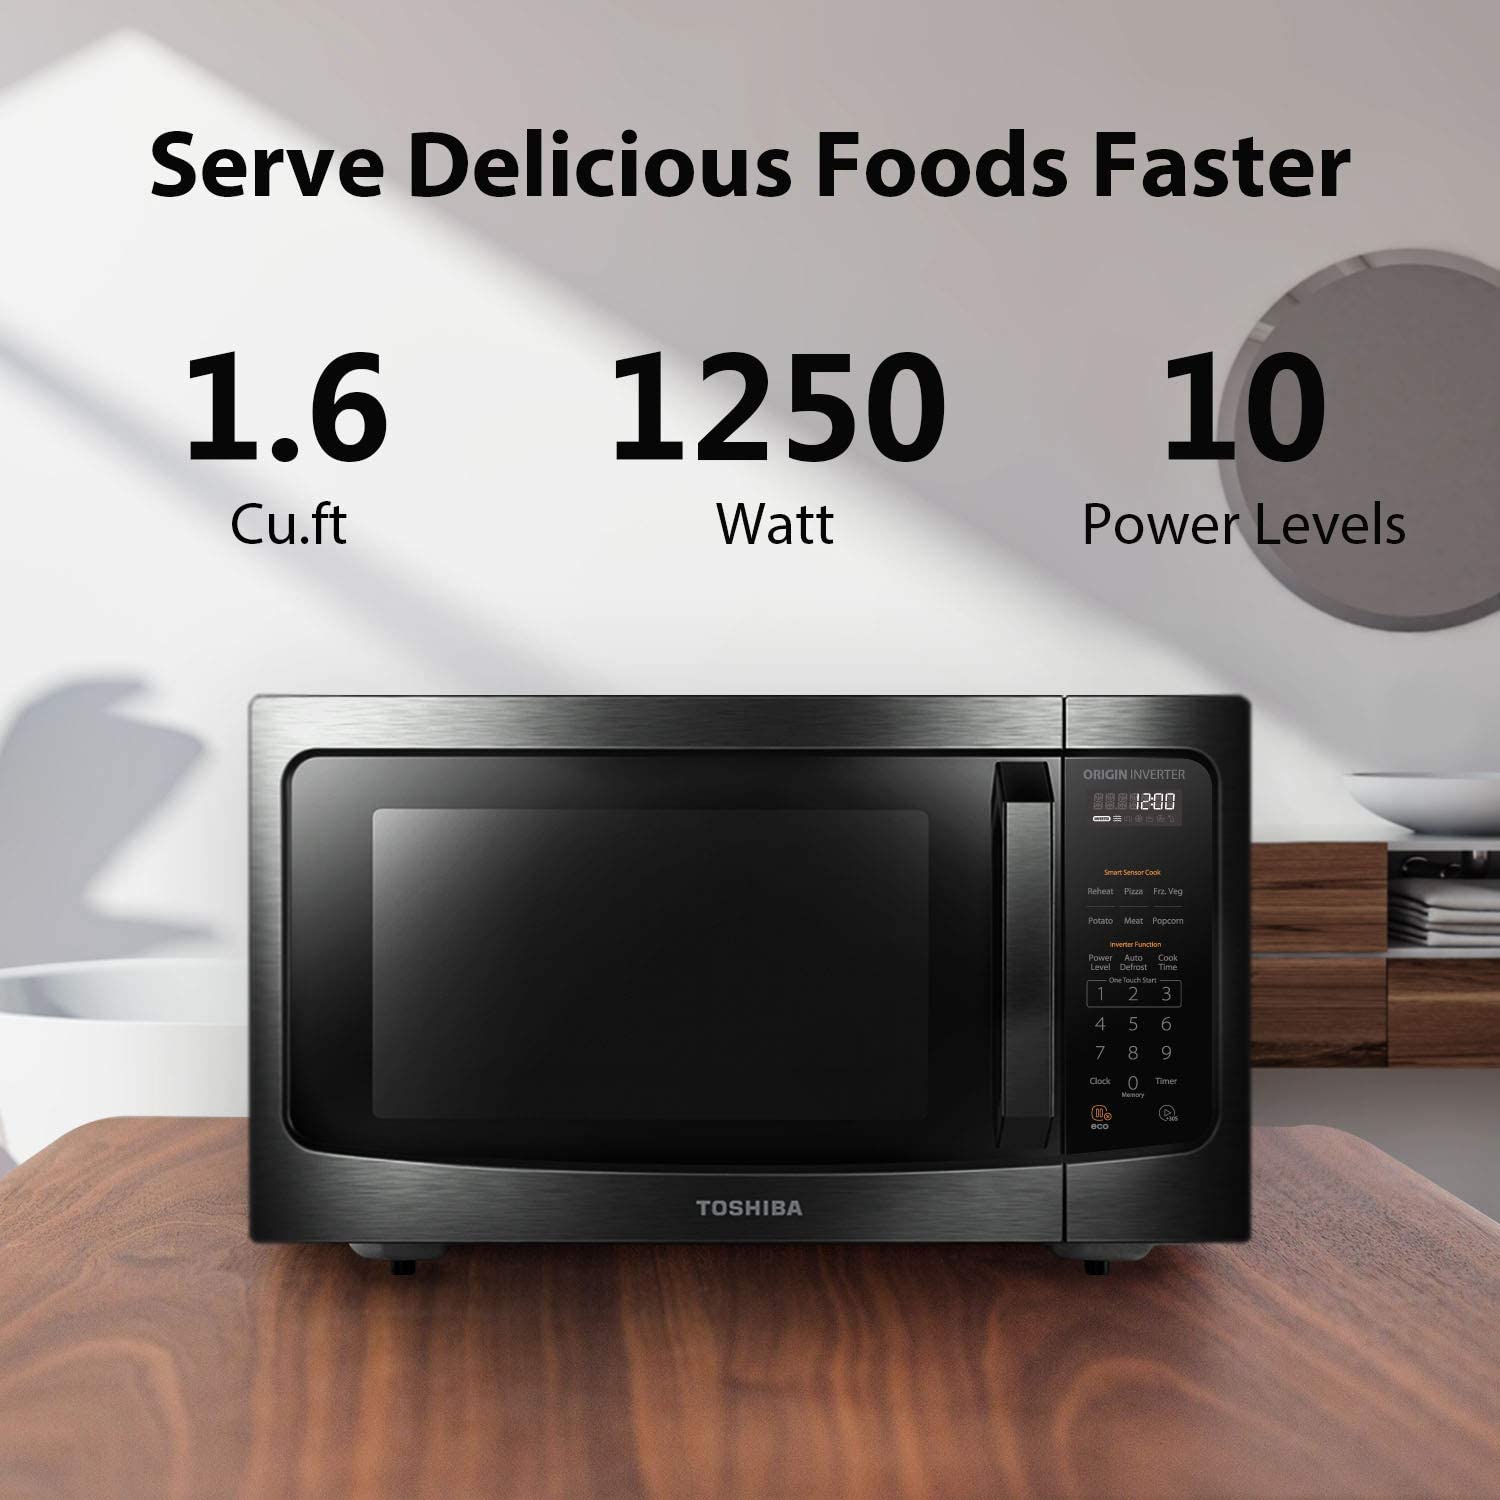 Toshiba 6-in-1 Countertop Microwave Oven with Inverter Technology